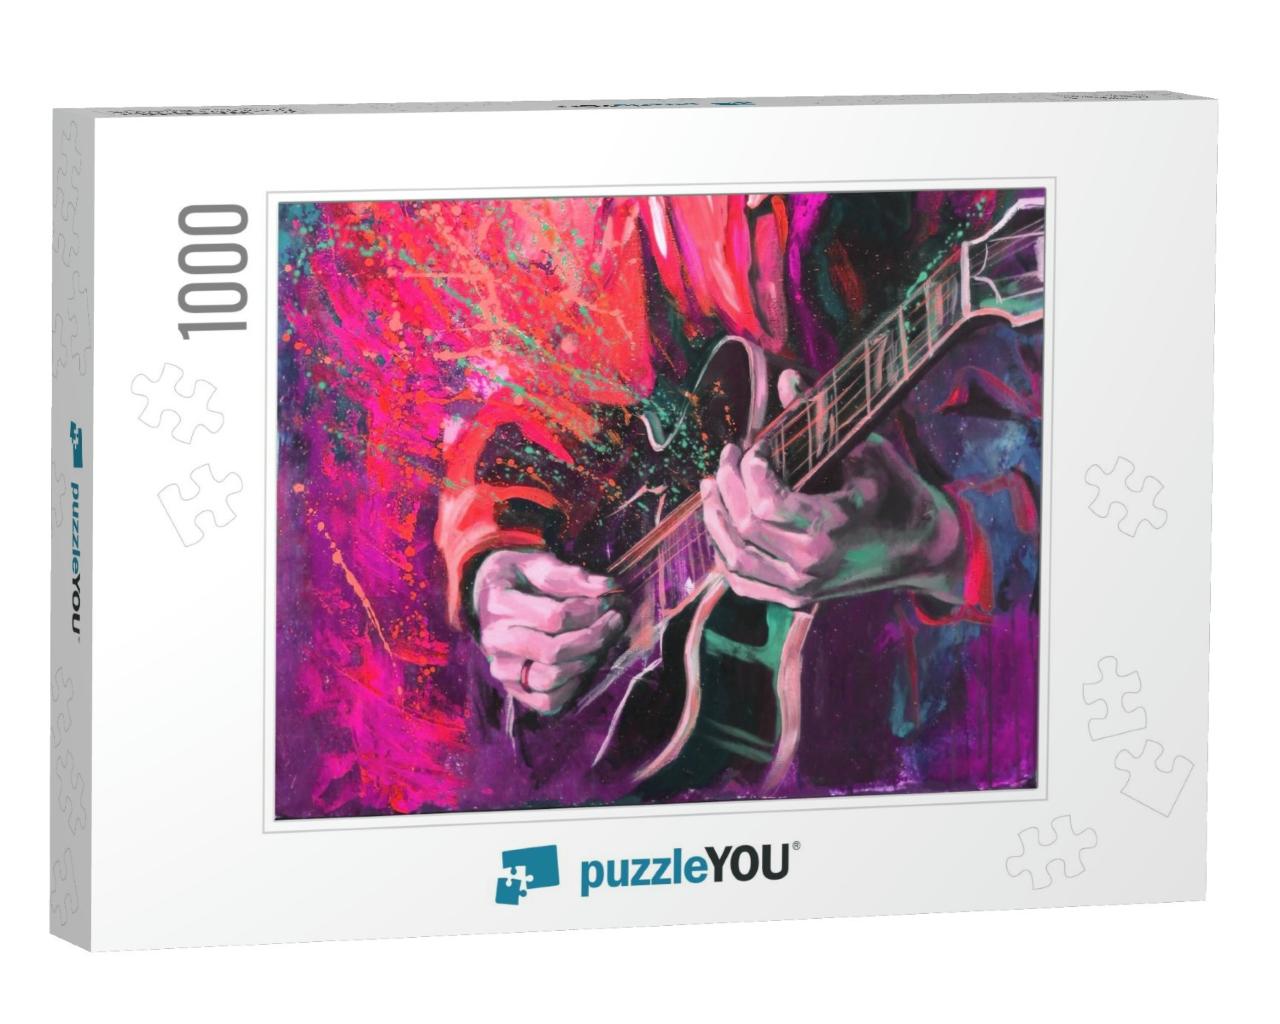 Jazz Guitarists Hands, Playing Guitar, with Multicolored... Jigsaw Puzzle with 1000 pieces